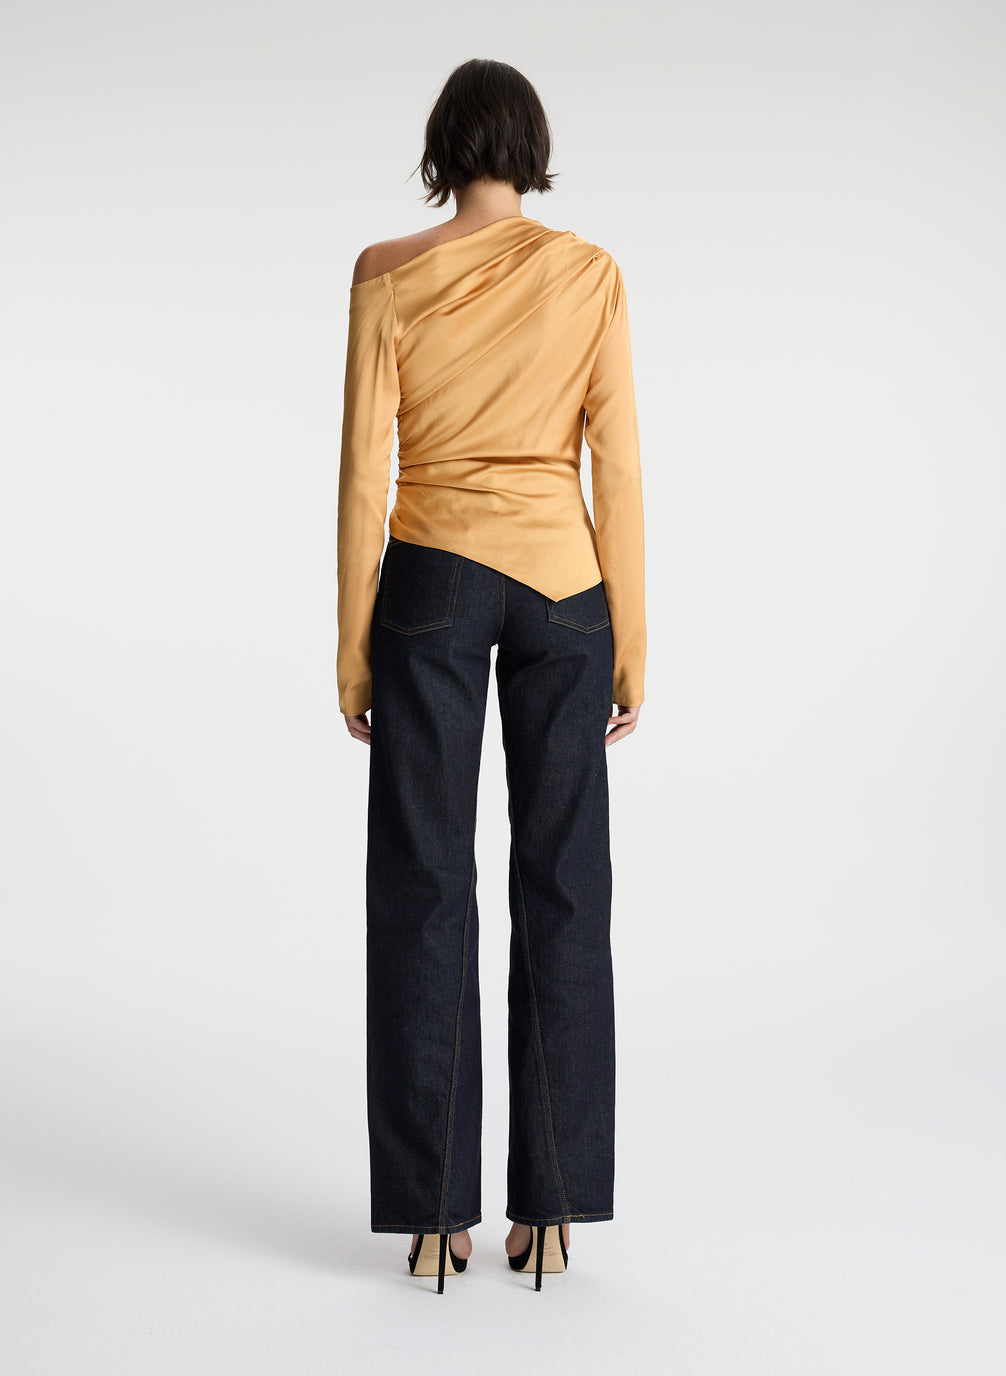 back view of woman wearing asymmetric gold satin long sleeve top and dark wash denim jeans